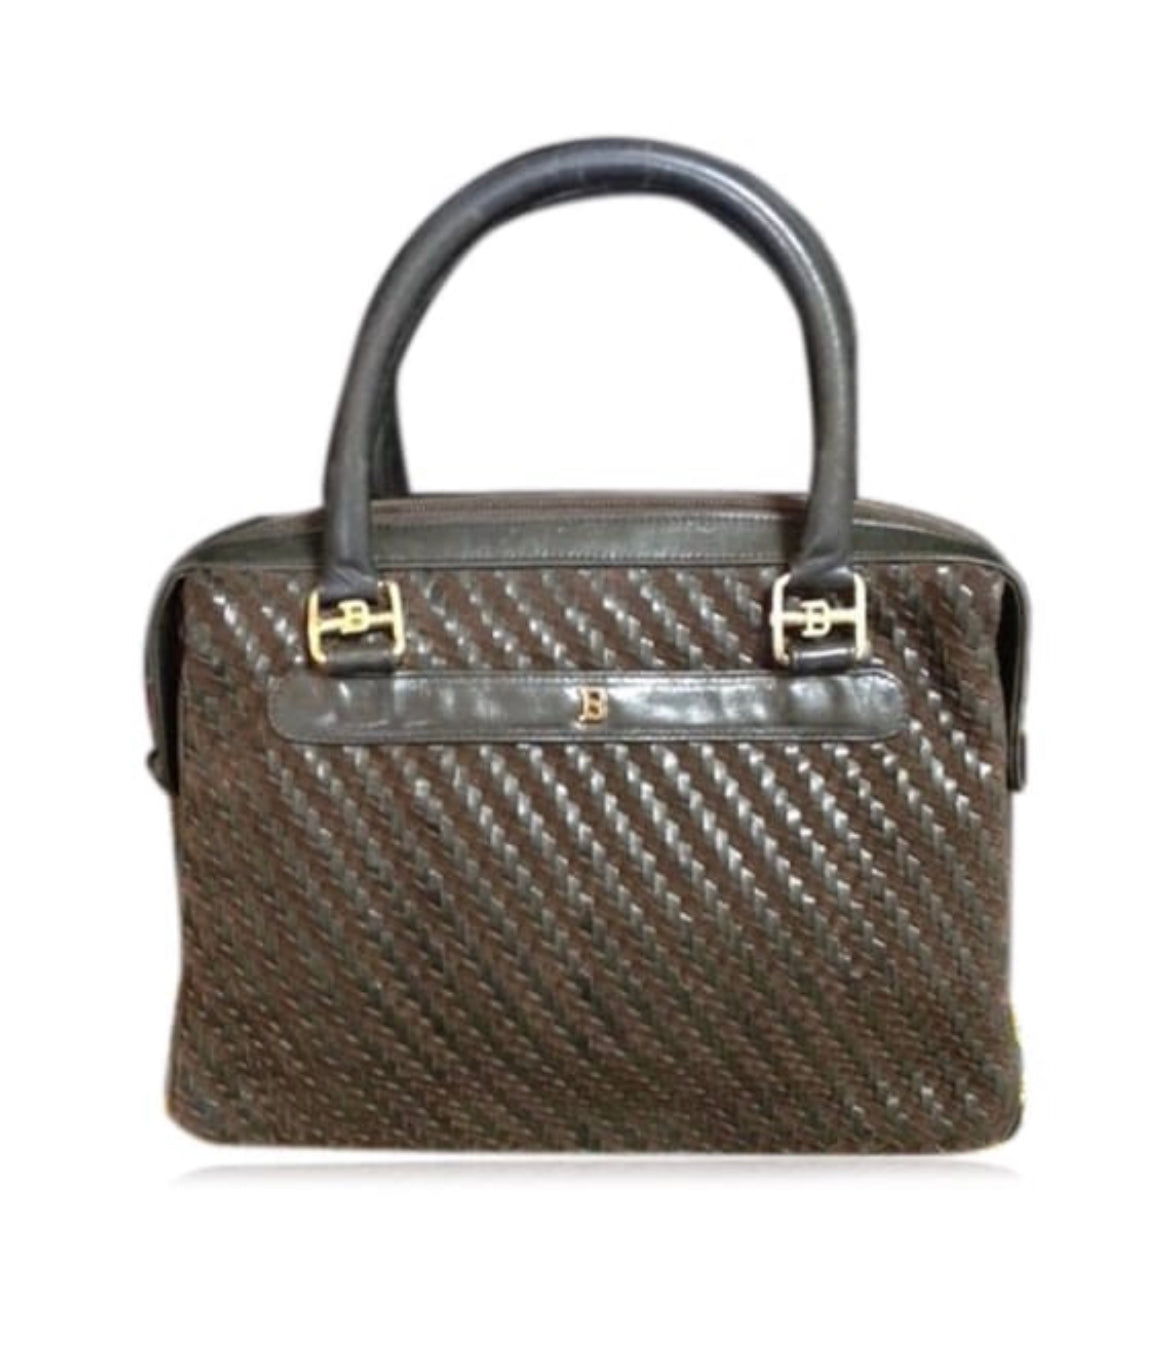 Vintage Bally darkbrown and khaki smooth and suede leather woven combination handbag purse with golden B logo motif. Back in the 70's